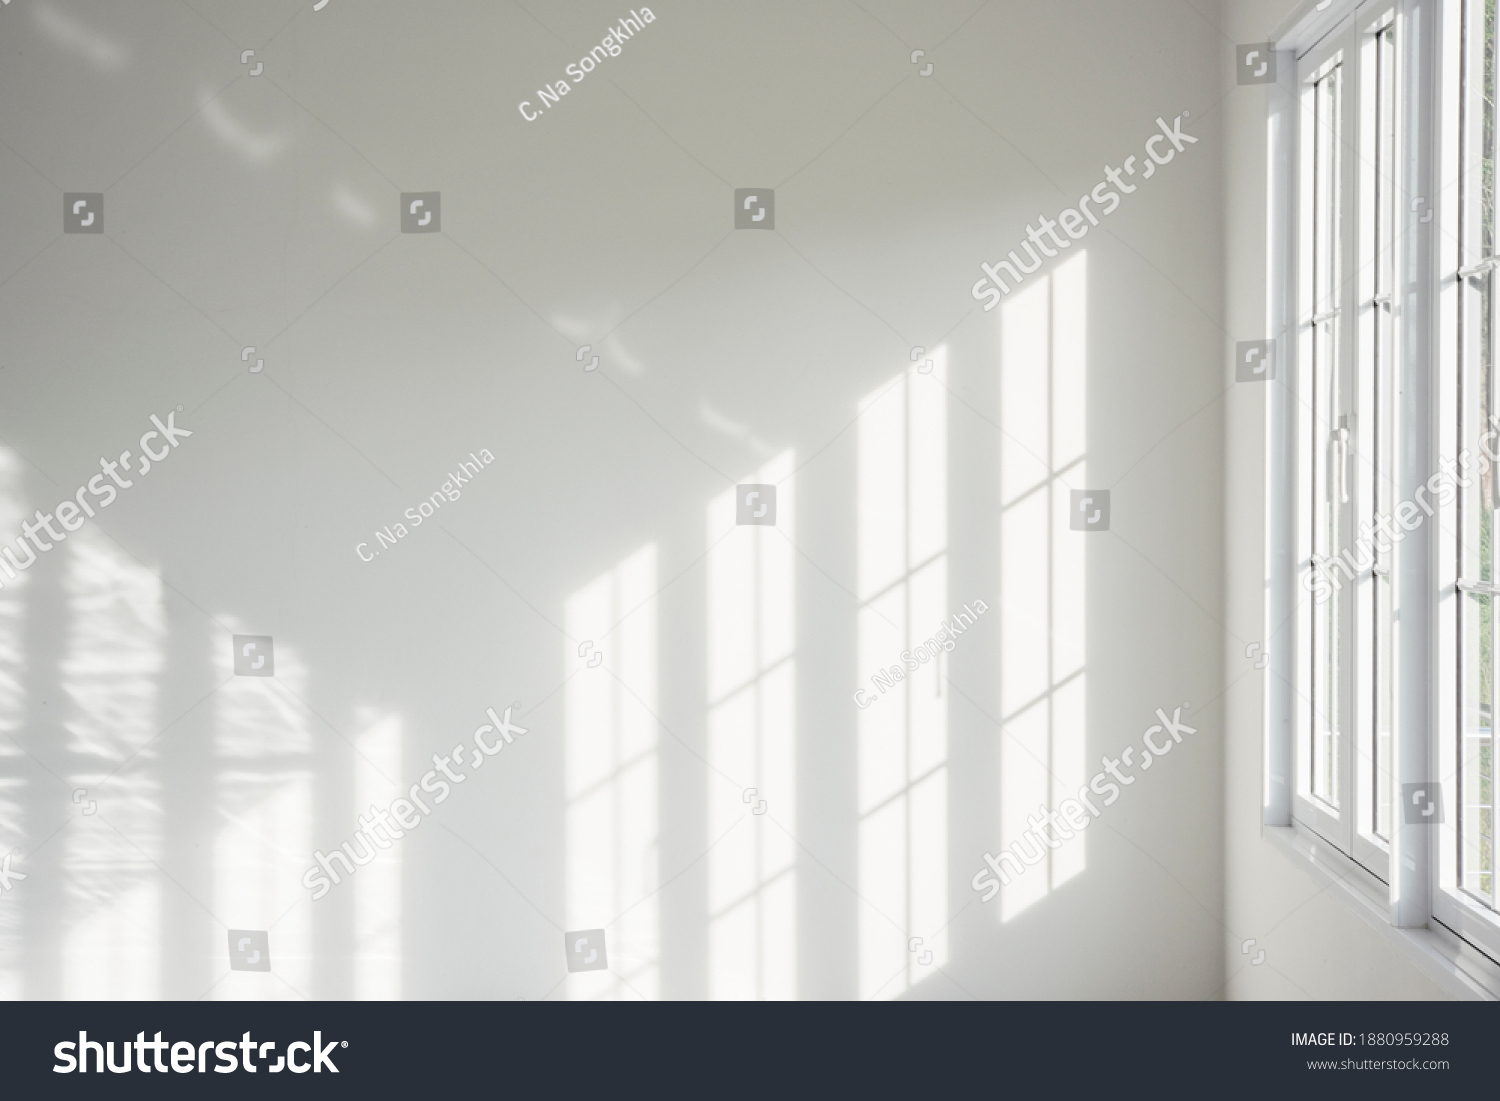 White room, glass windows, combined with the sunlight on the wall. #1880959288